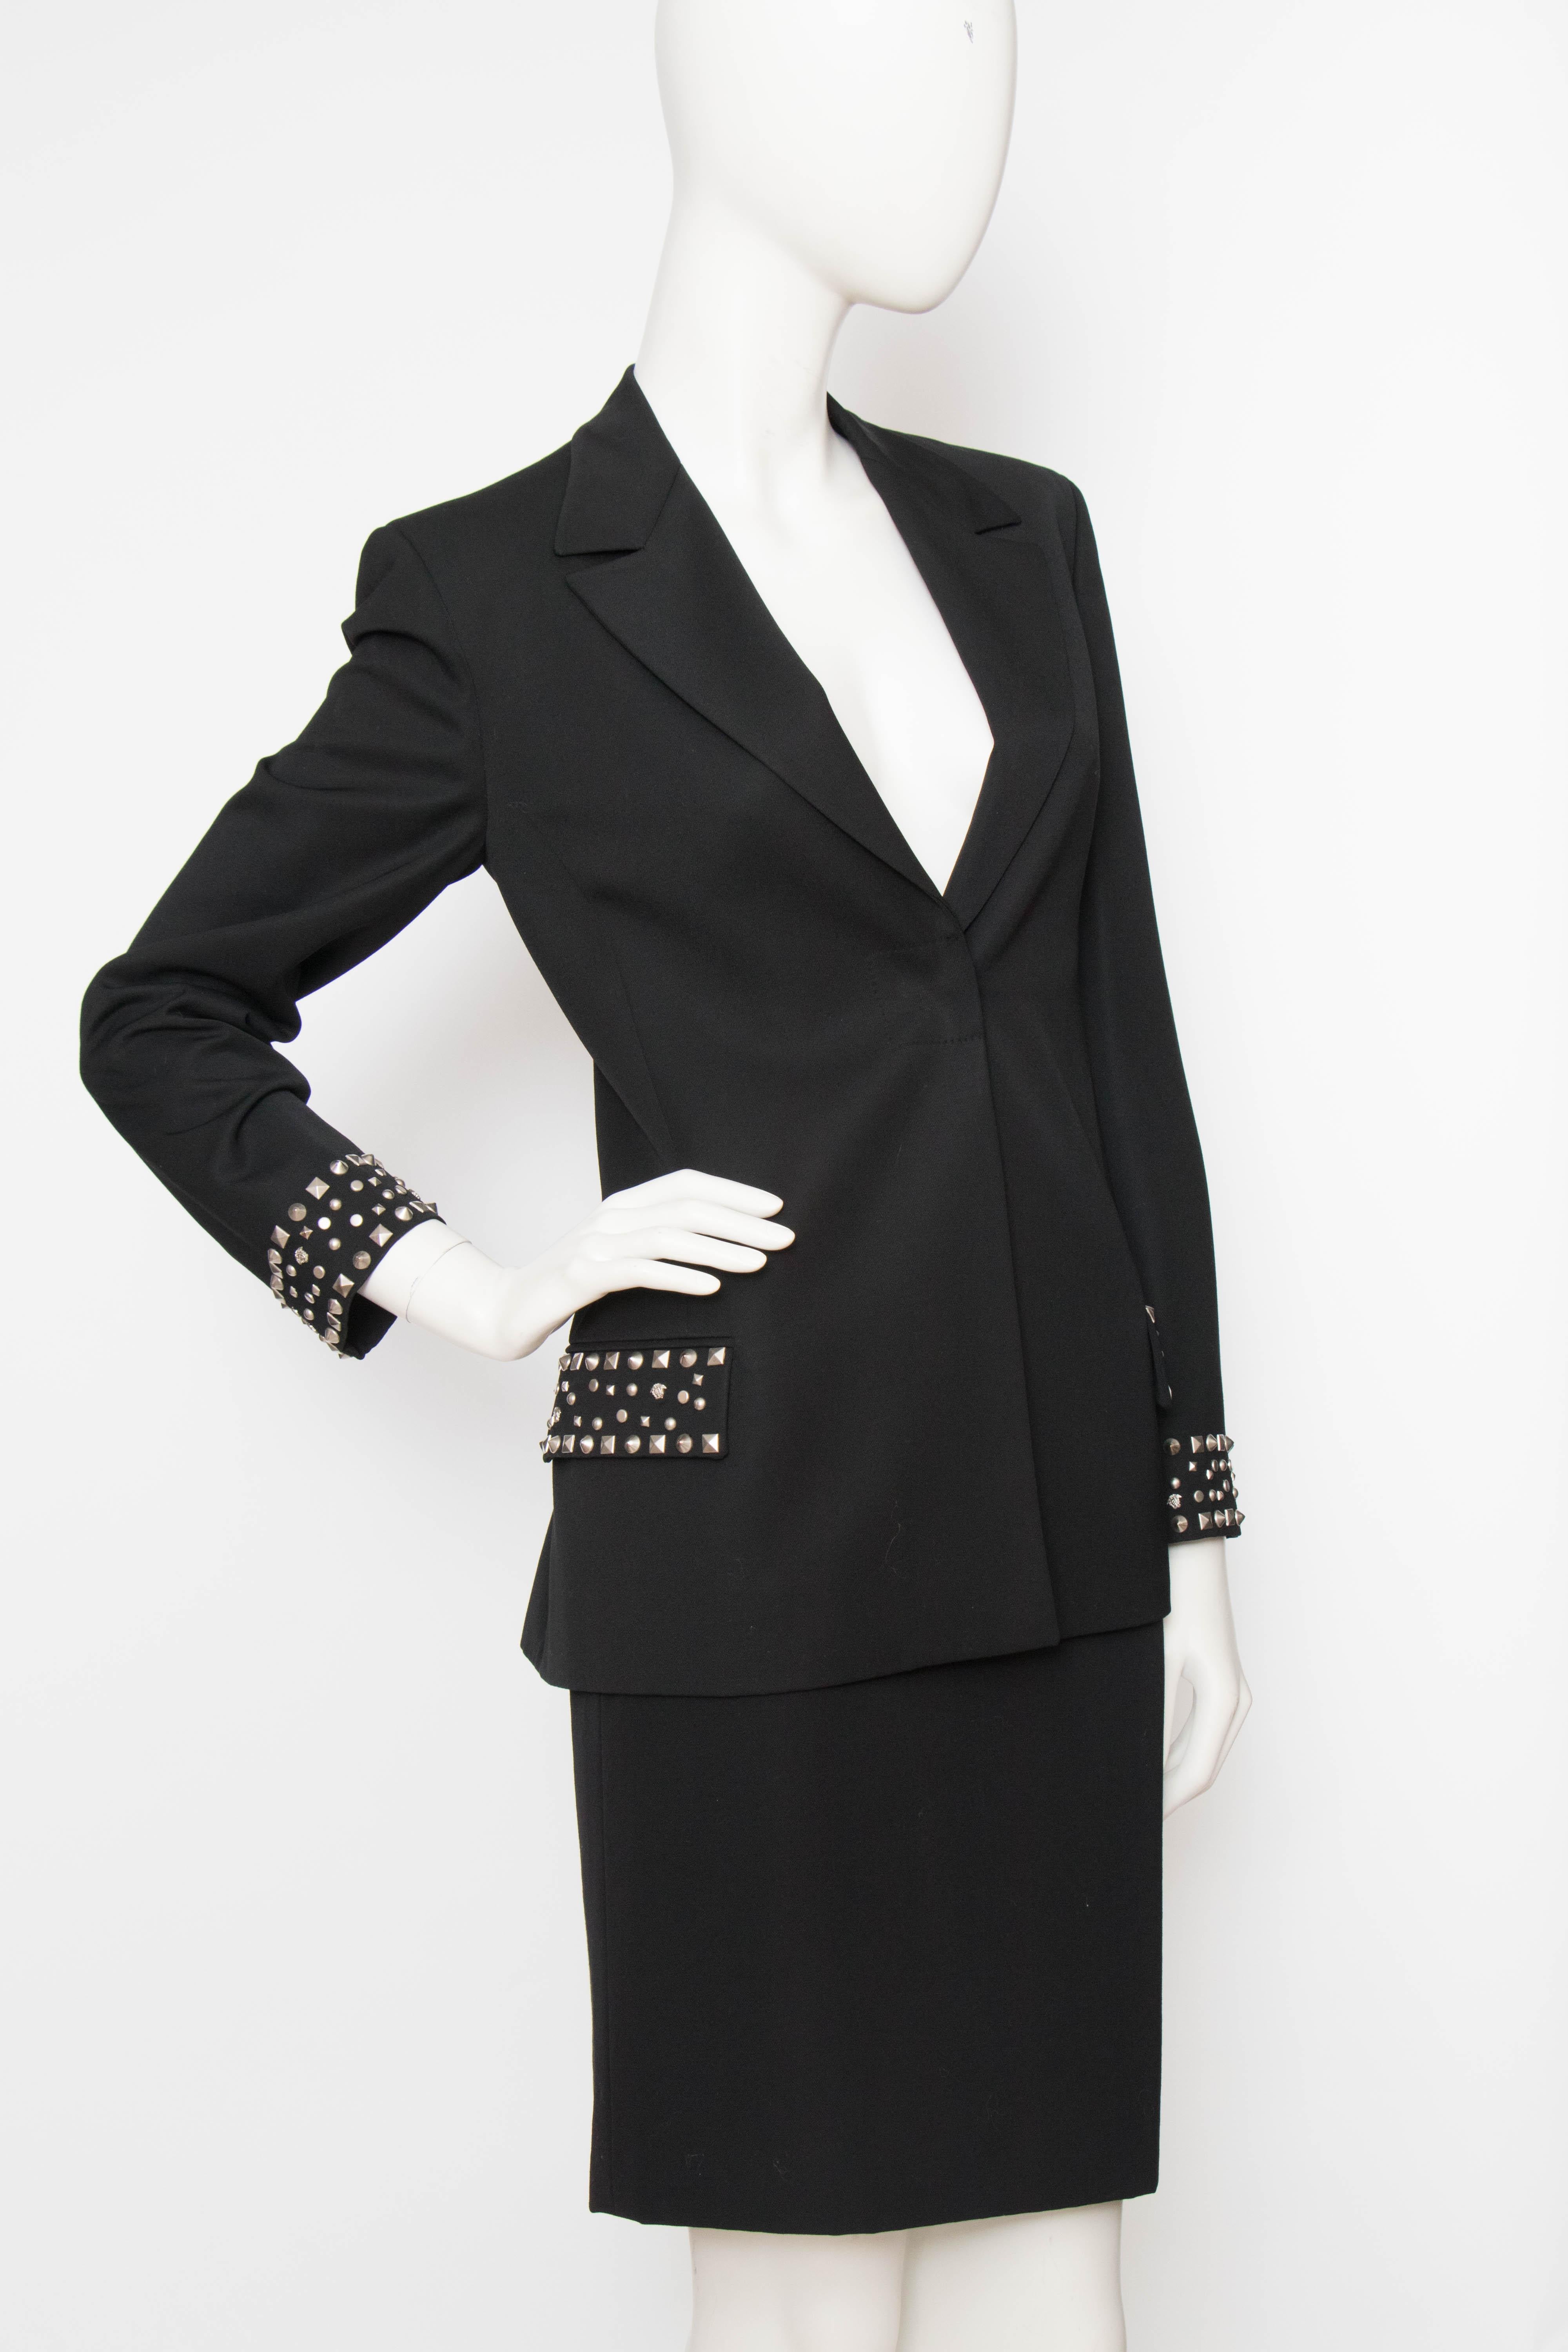 An incredible 1990s Gianni Versace Couture wool skirt suit consisting o a fitted blazer and alluring pencil skirt. The classic garment is embellished with edgy studs in various shapes including Madusa heads. Both items are fully lined in rayon with